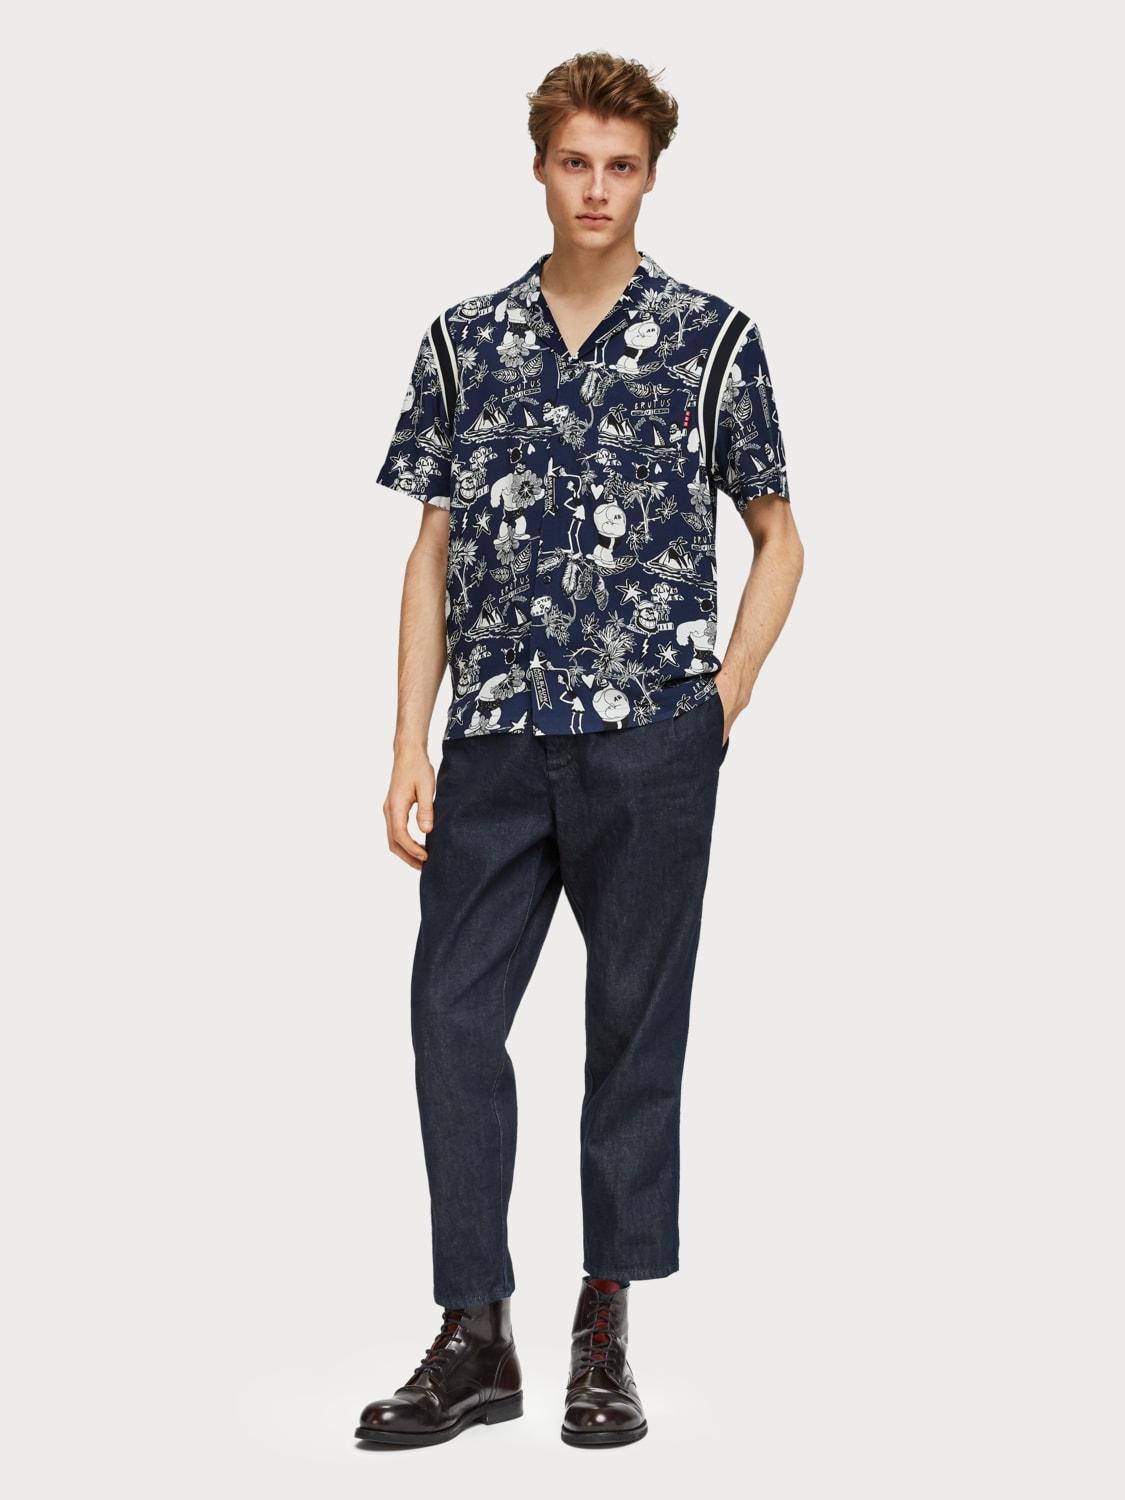 Scotch & Soda Brutus Short - Sleeve Printed Slim Fit Shirt in Combo ...